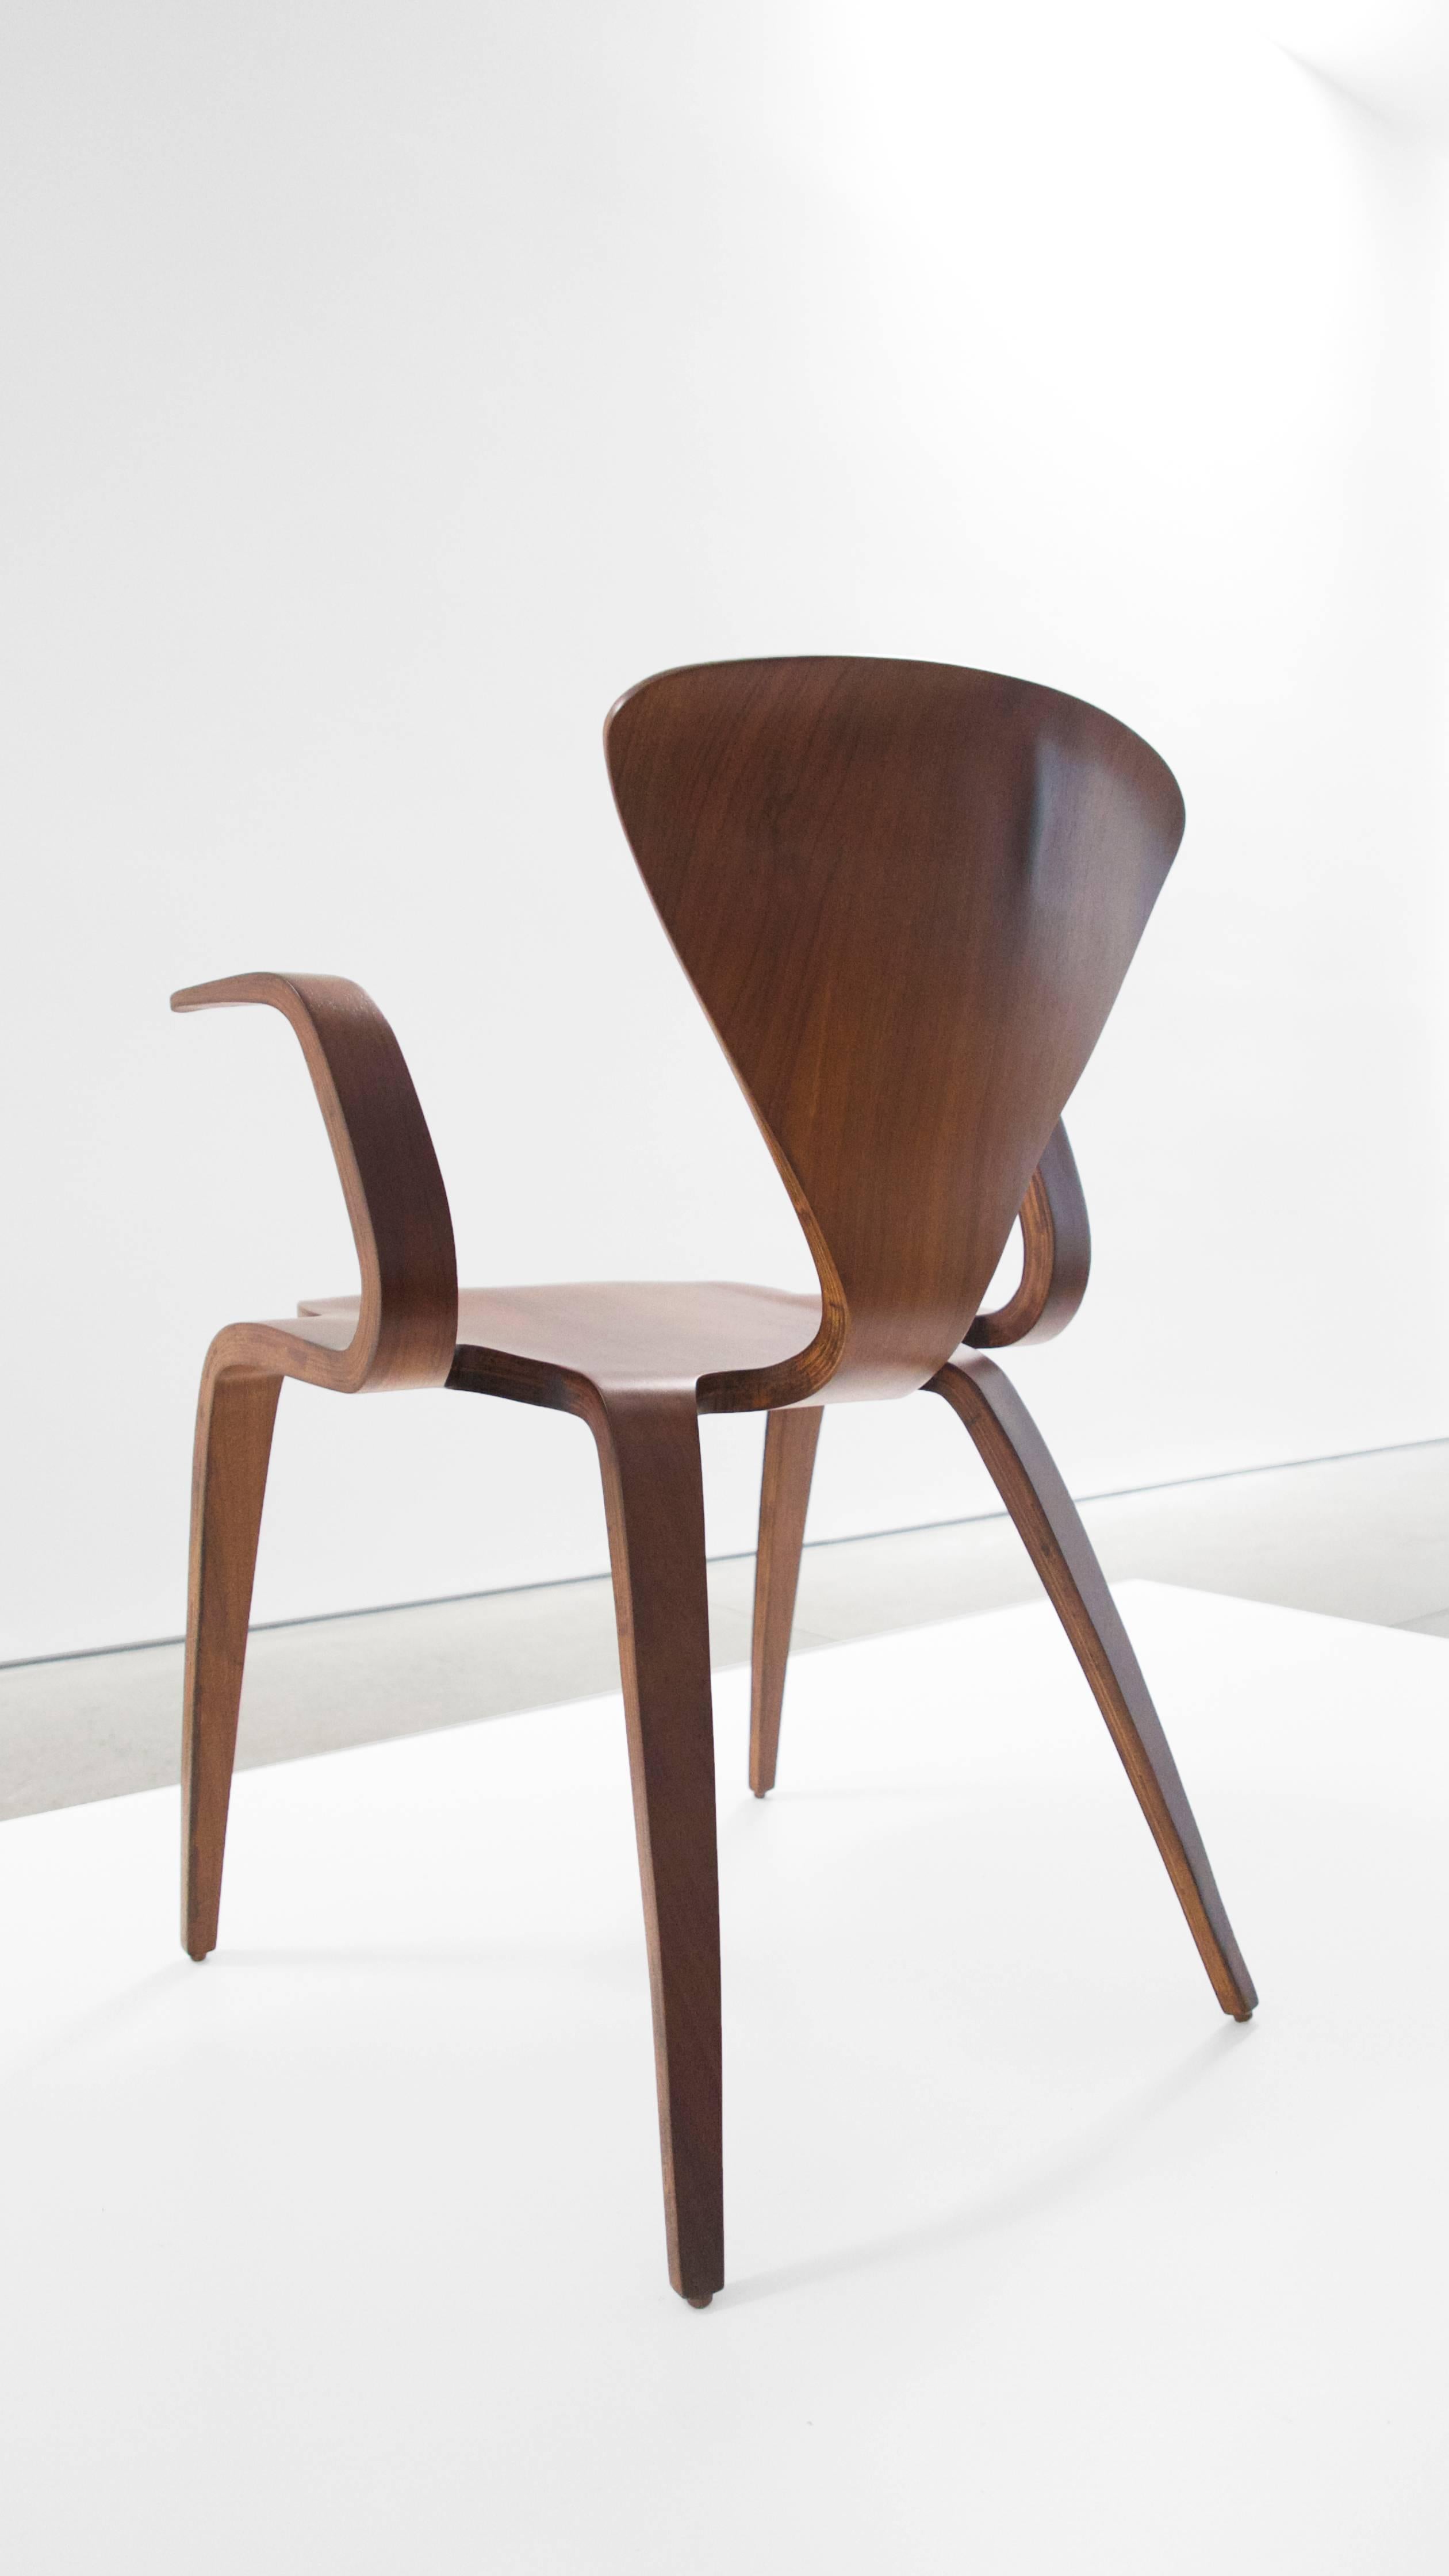 Rare Norman Cherner prototype armchair for Plycraft.